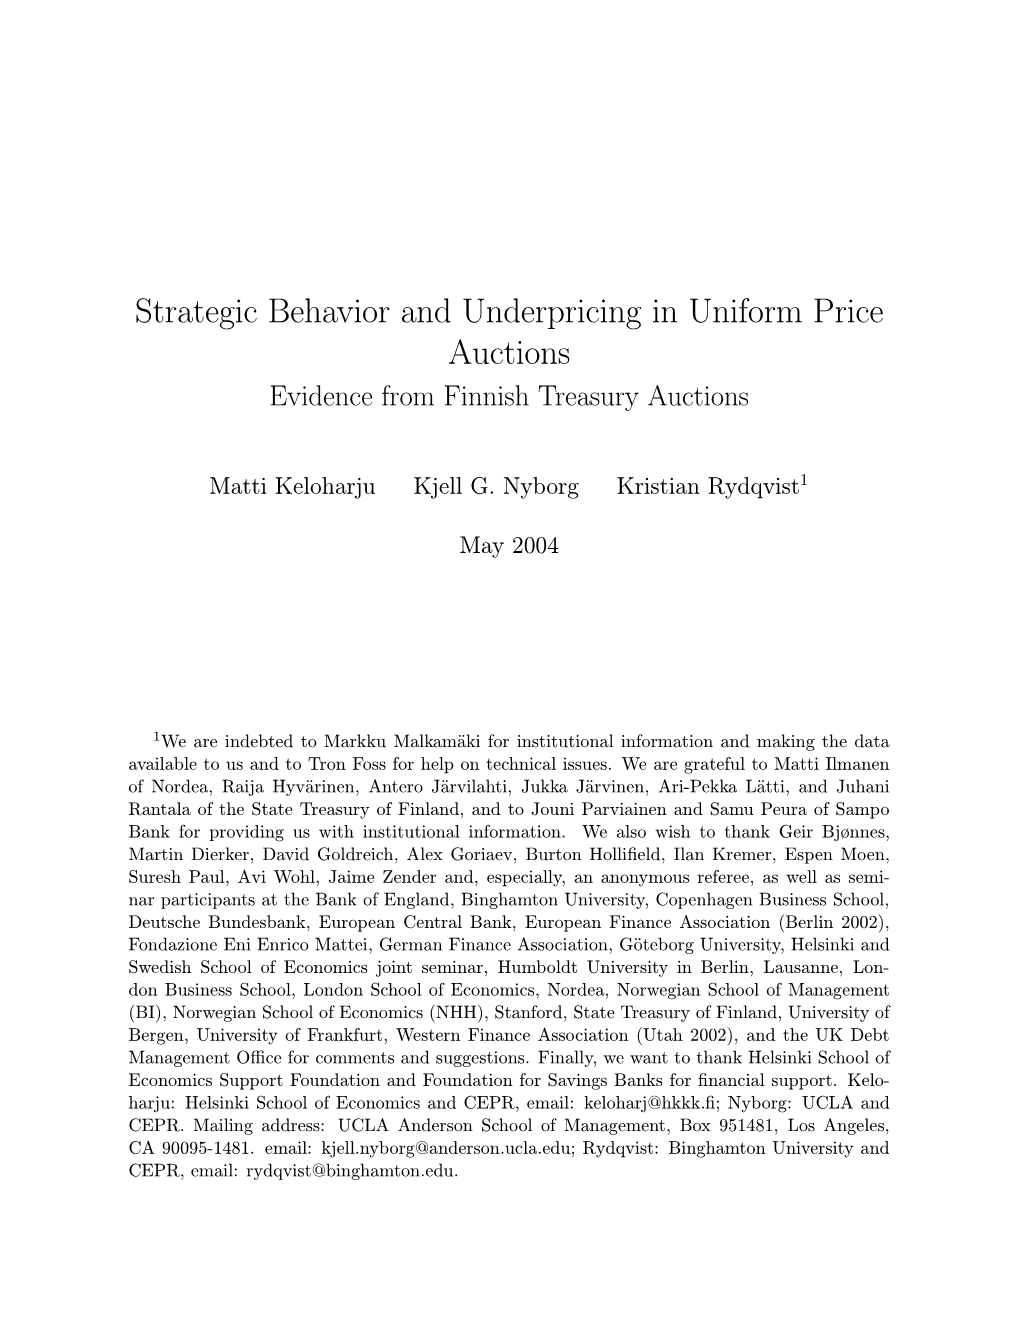 Strategic Behavior and Underpricing in Uniform Price Auctions Evidence from Finnish Treasury Auctions